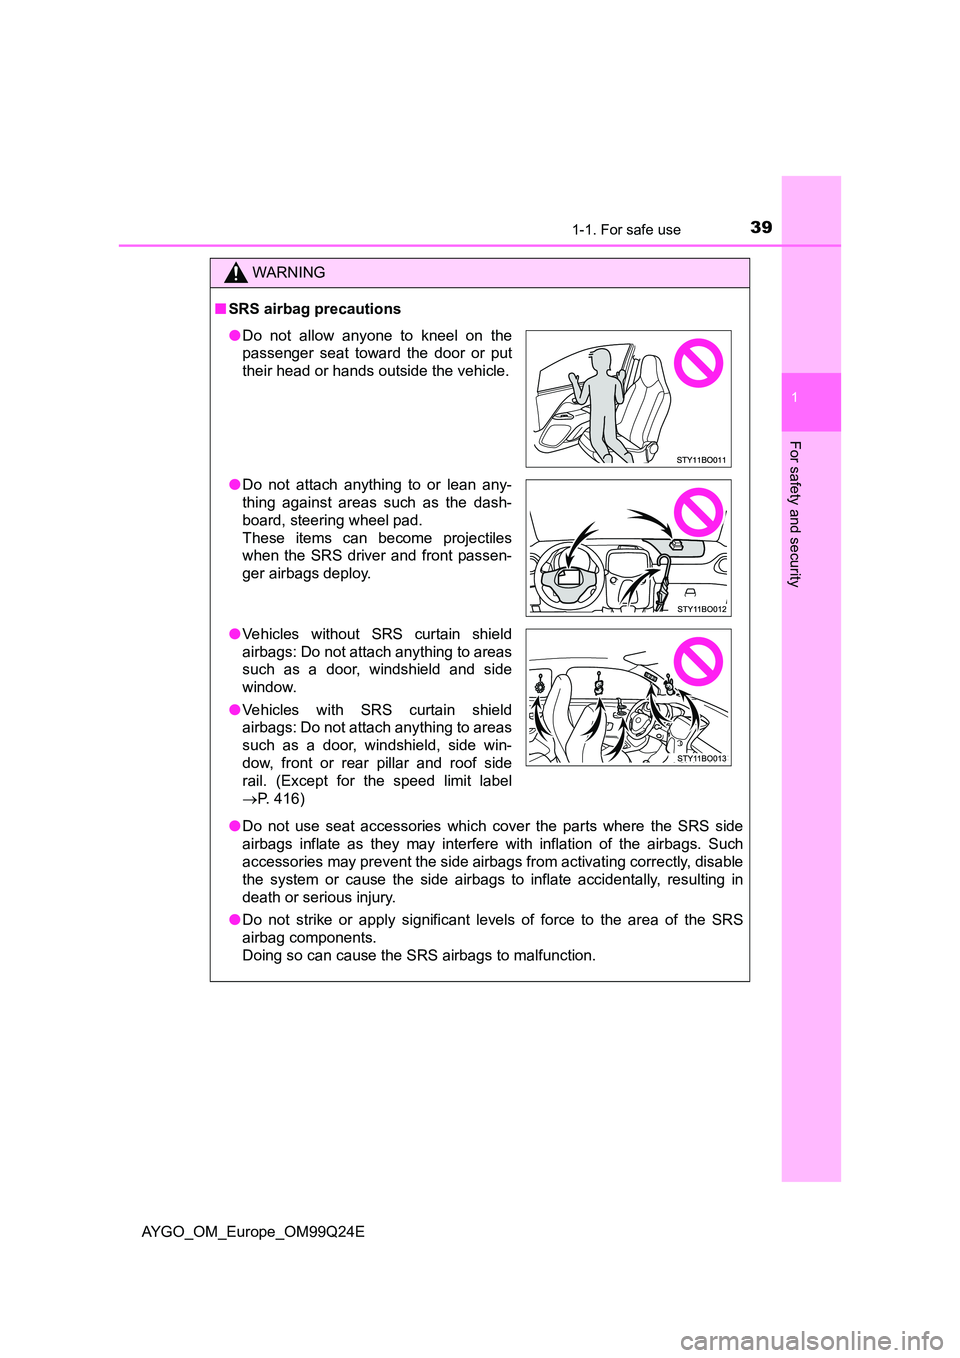 TOYOTA AYGO 2017  Owners Manual (in English) 391-1. For safe use
1
For safety and security
AYGO_OM_Europe_OM99Q24E
WARNING
■SRS airbag precautions 
● Do not use seat accessories which cover the parts where the SRS side 
airbags inflate as th